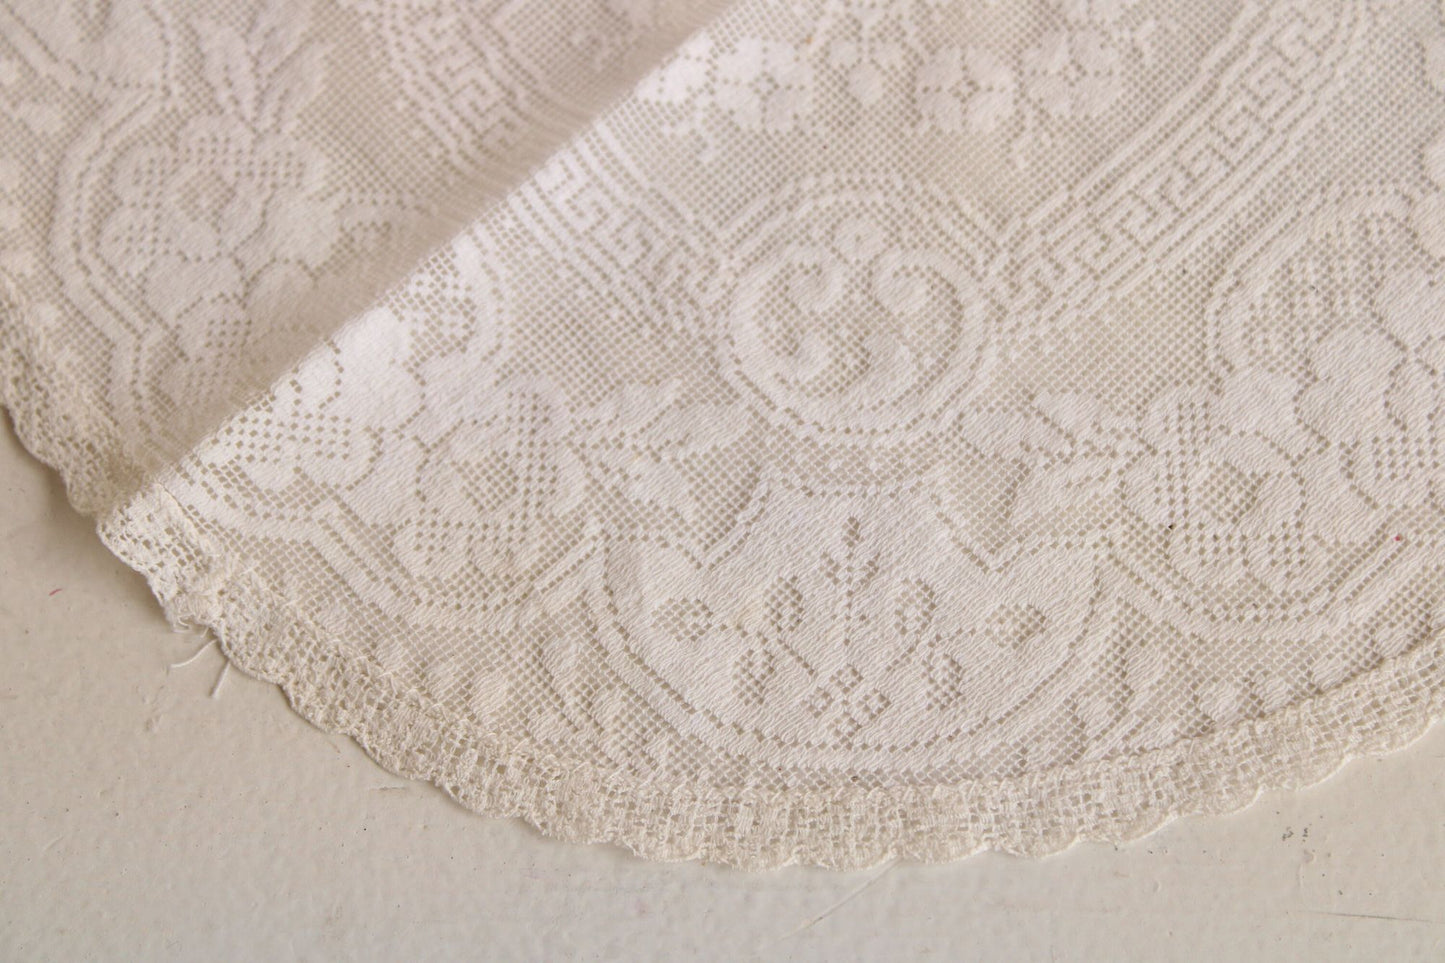 Vintage 1940s 1950s Round White Floral Lace Doily